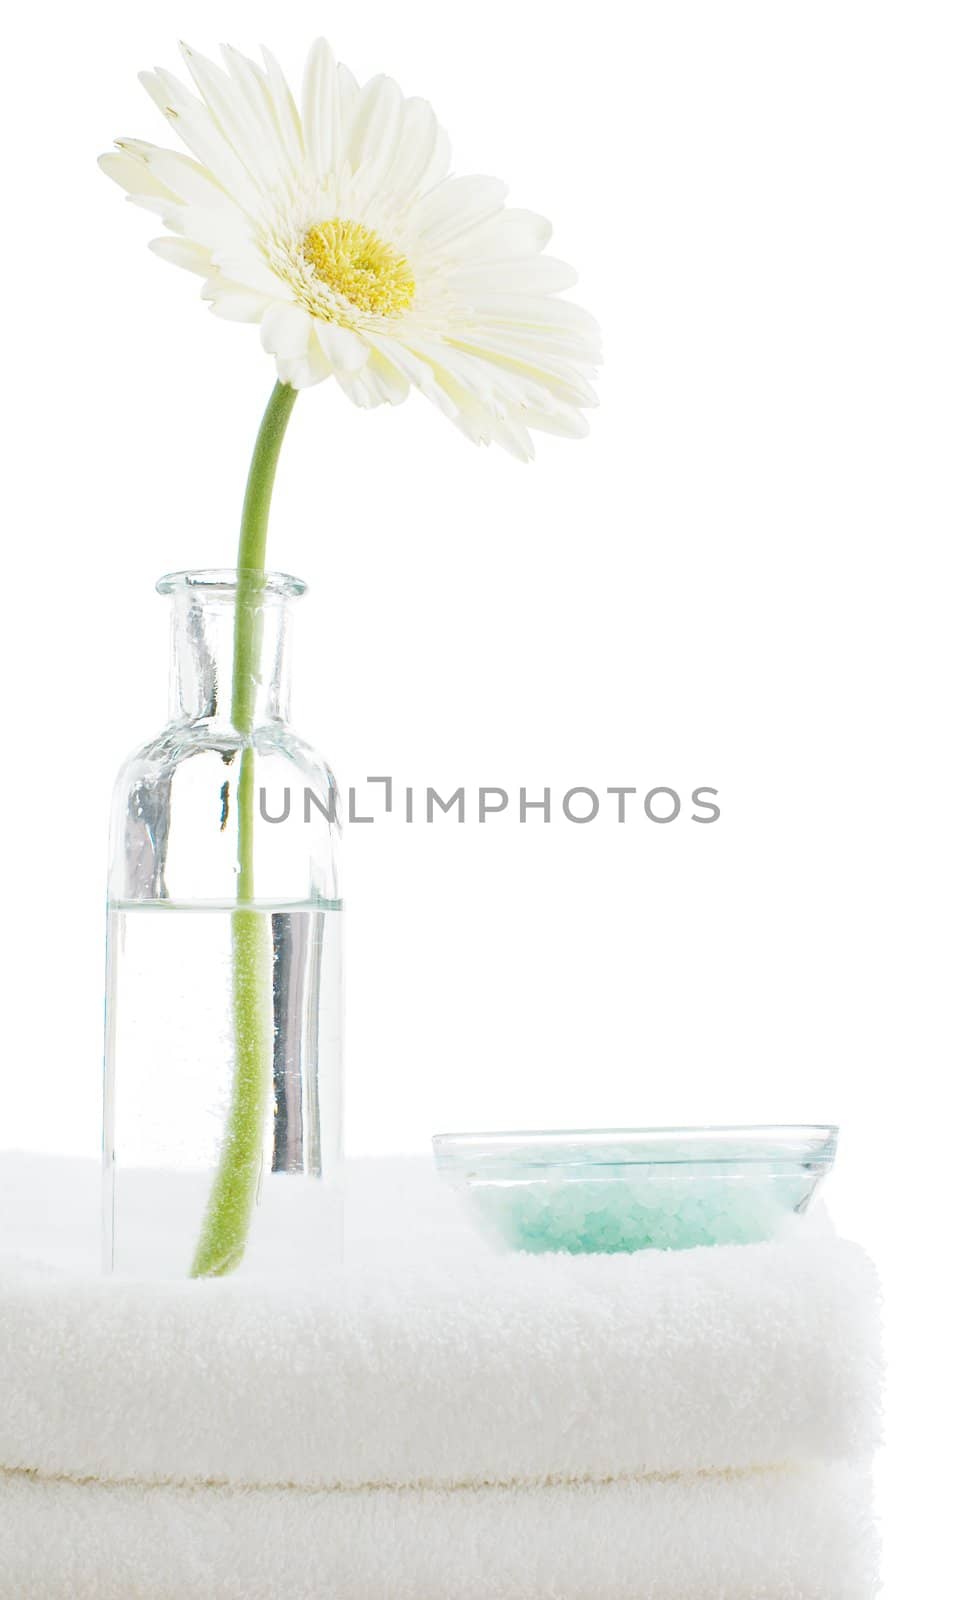 Towel stack with spa objects against a white background.